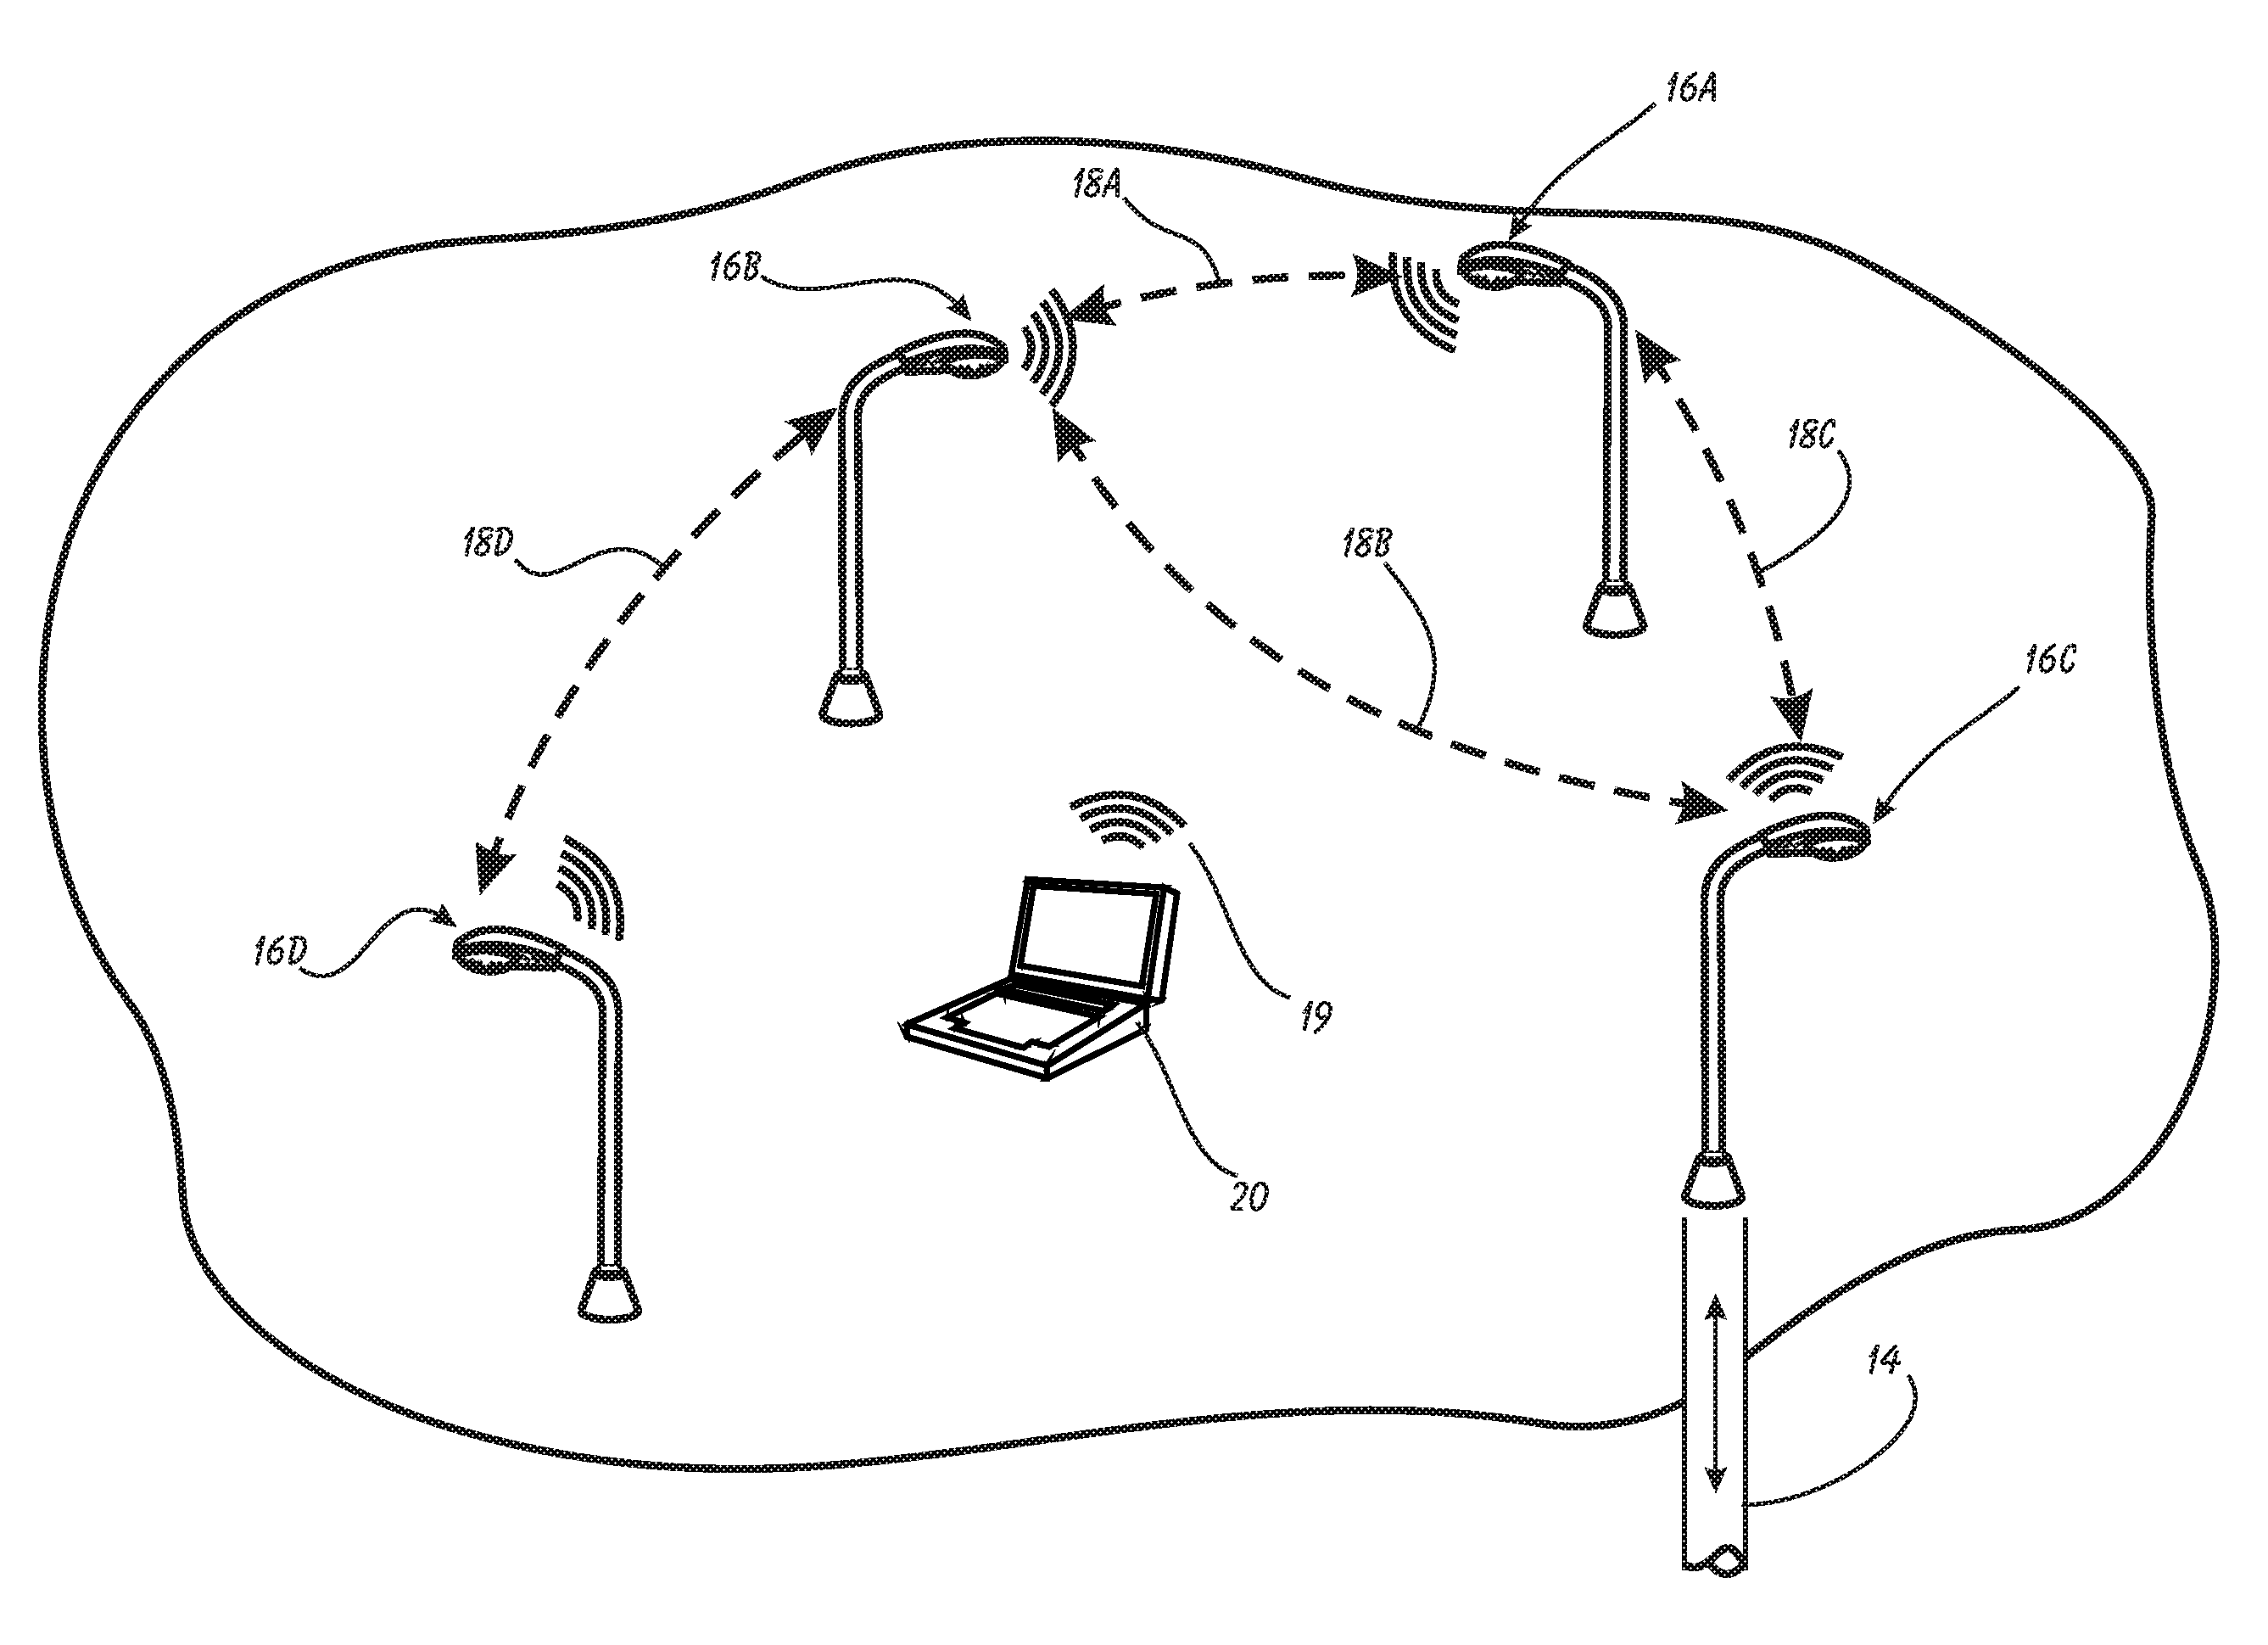 Combination Lamp and Wireless Network Access System